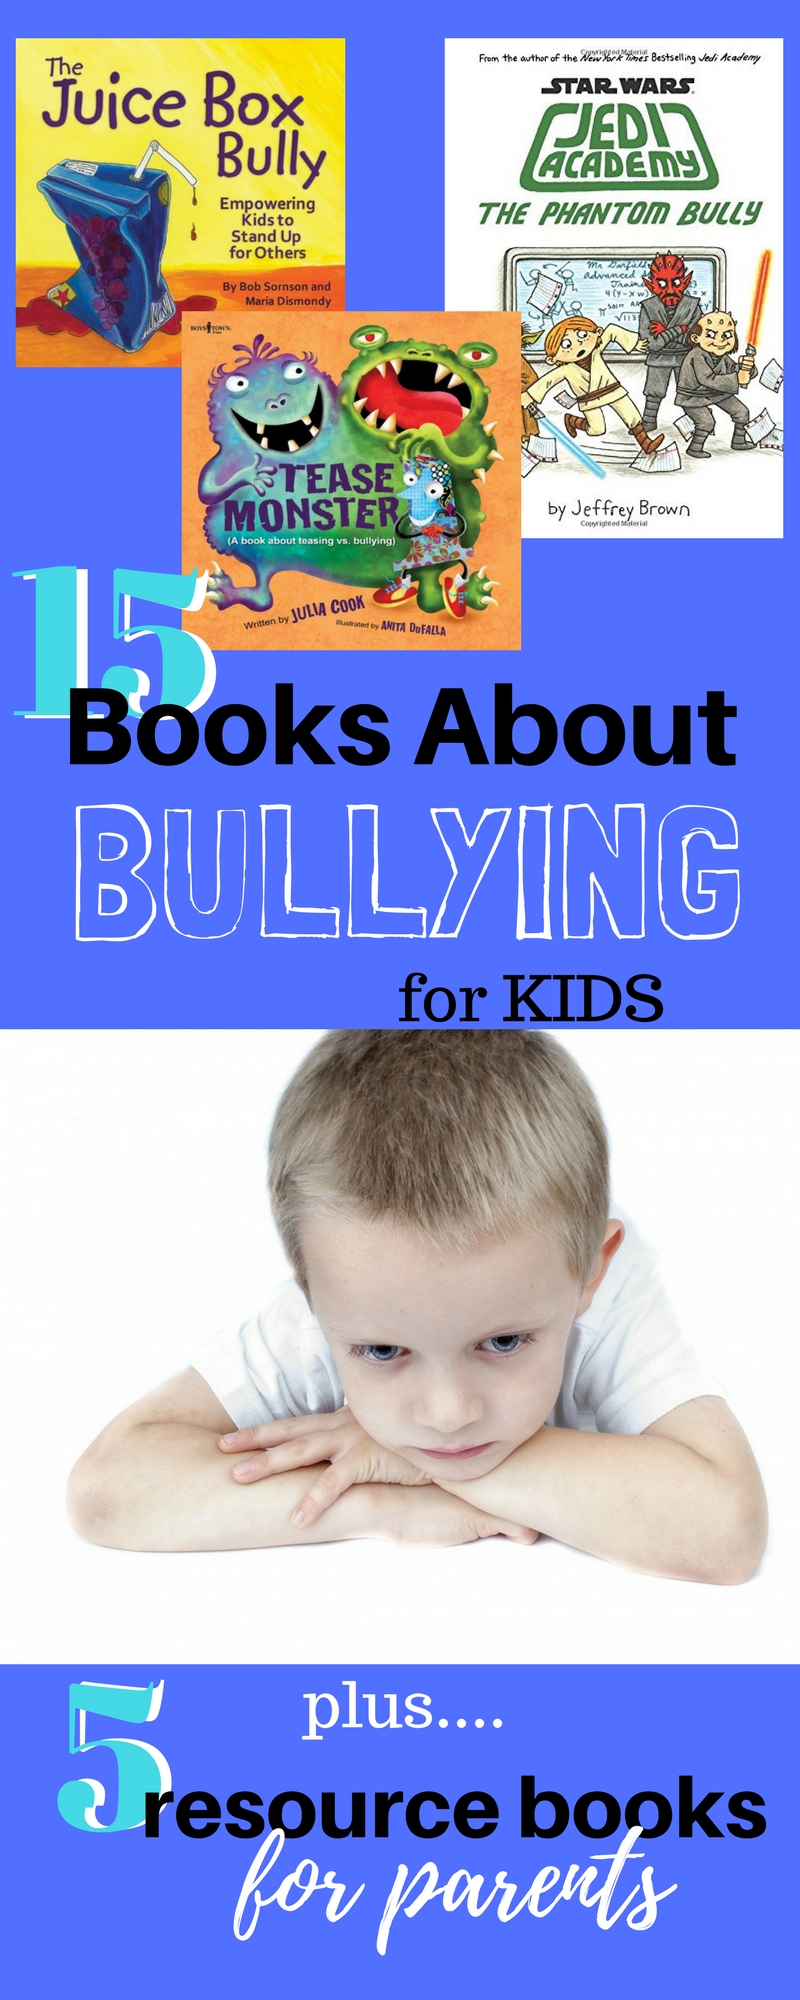 Books About Bullying for Kids